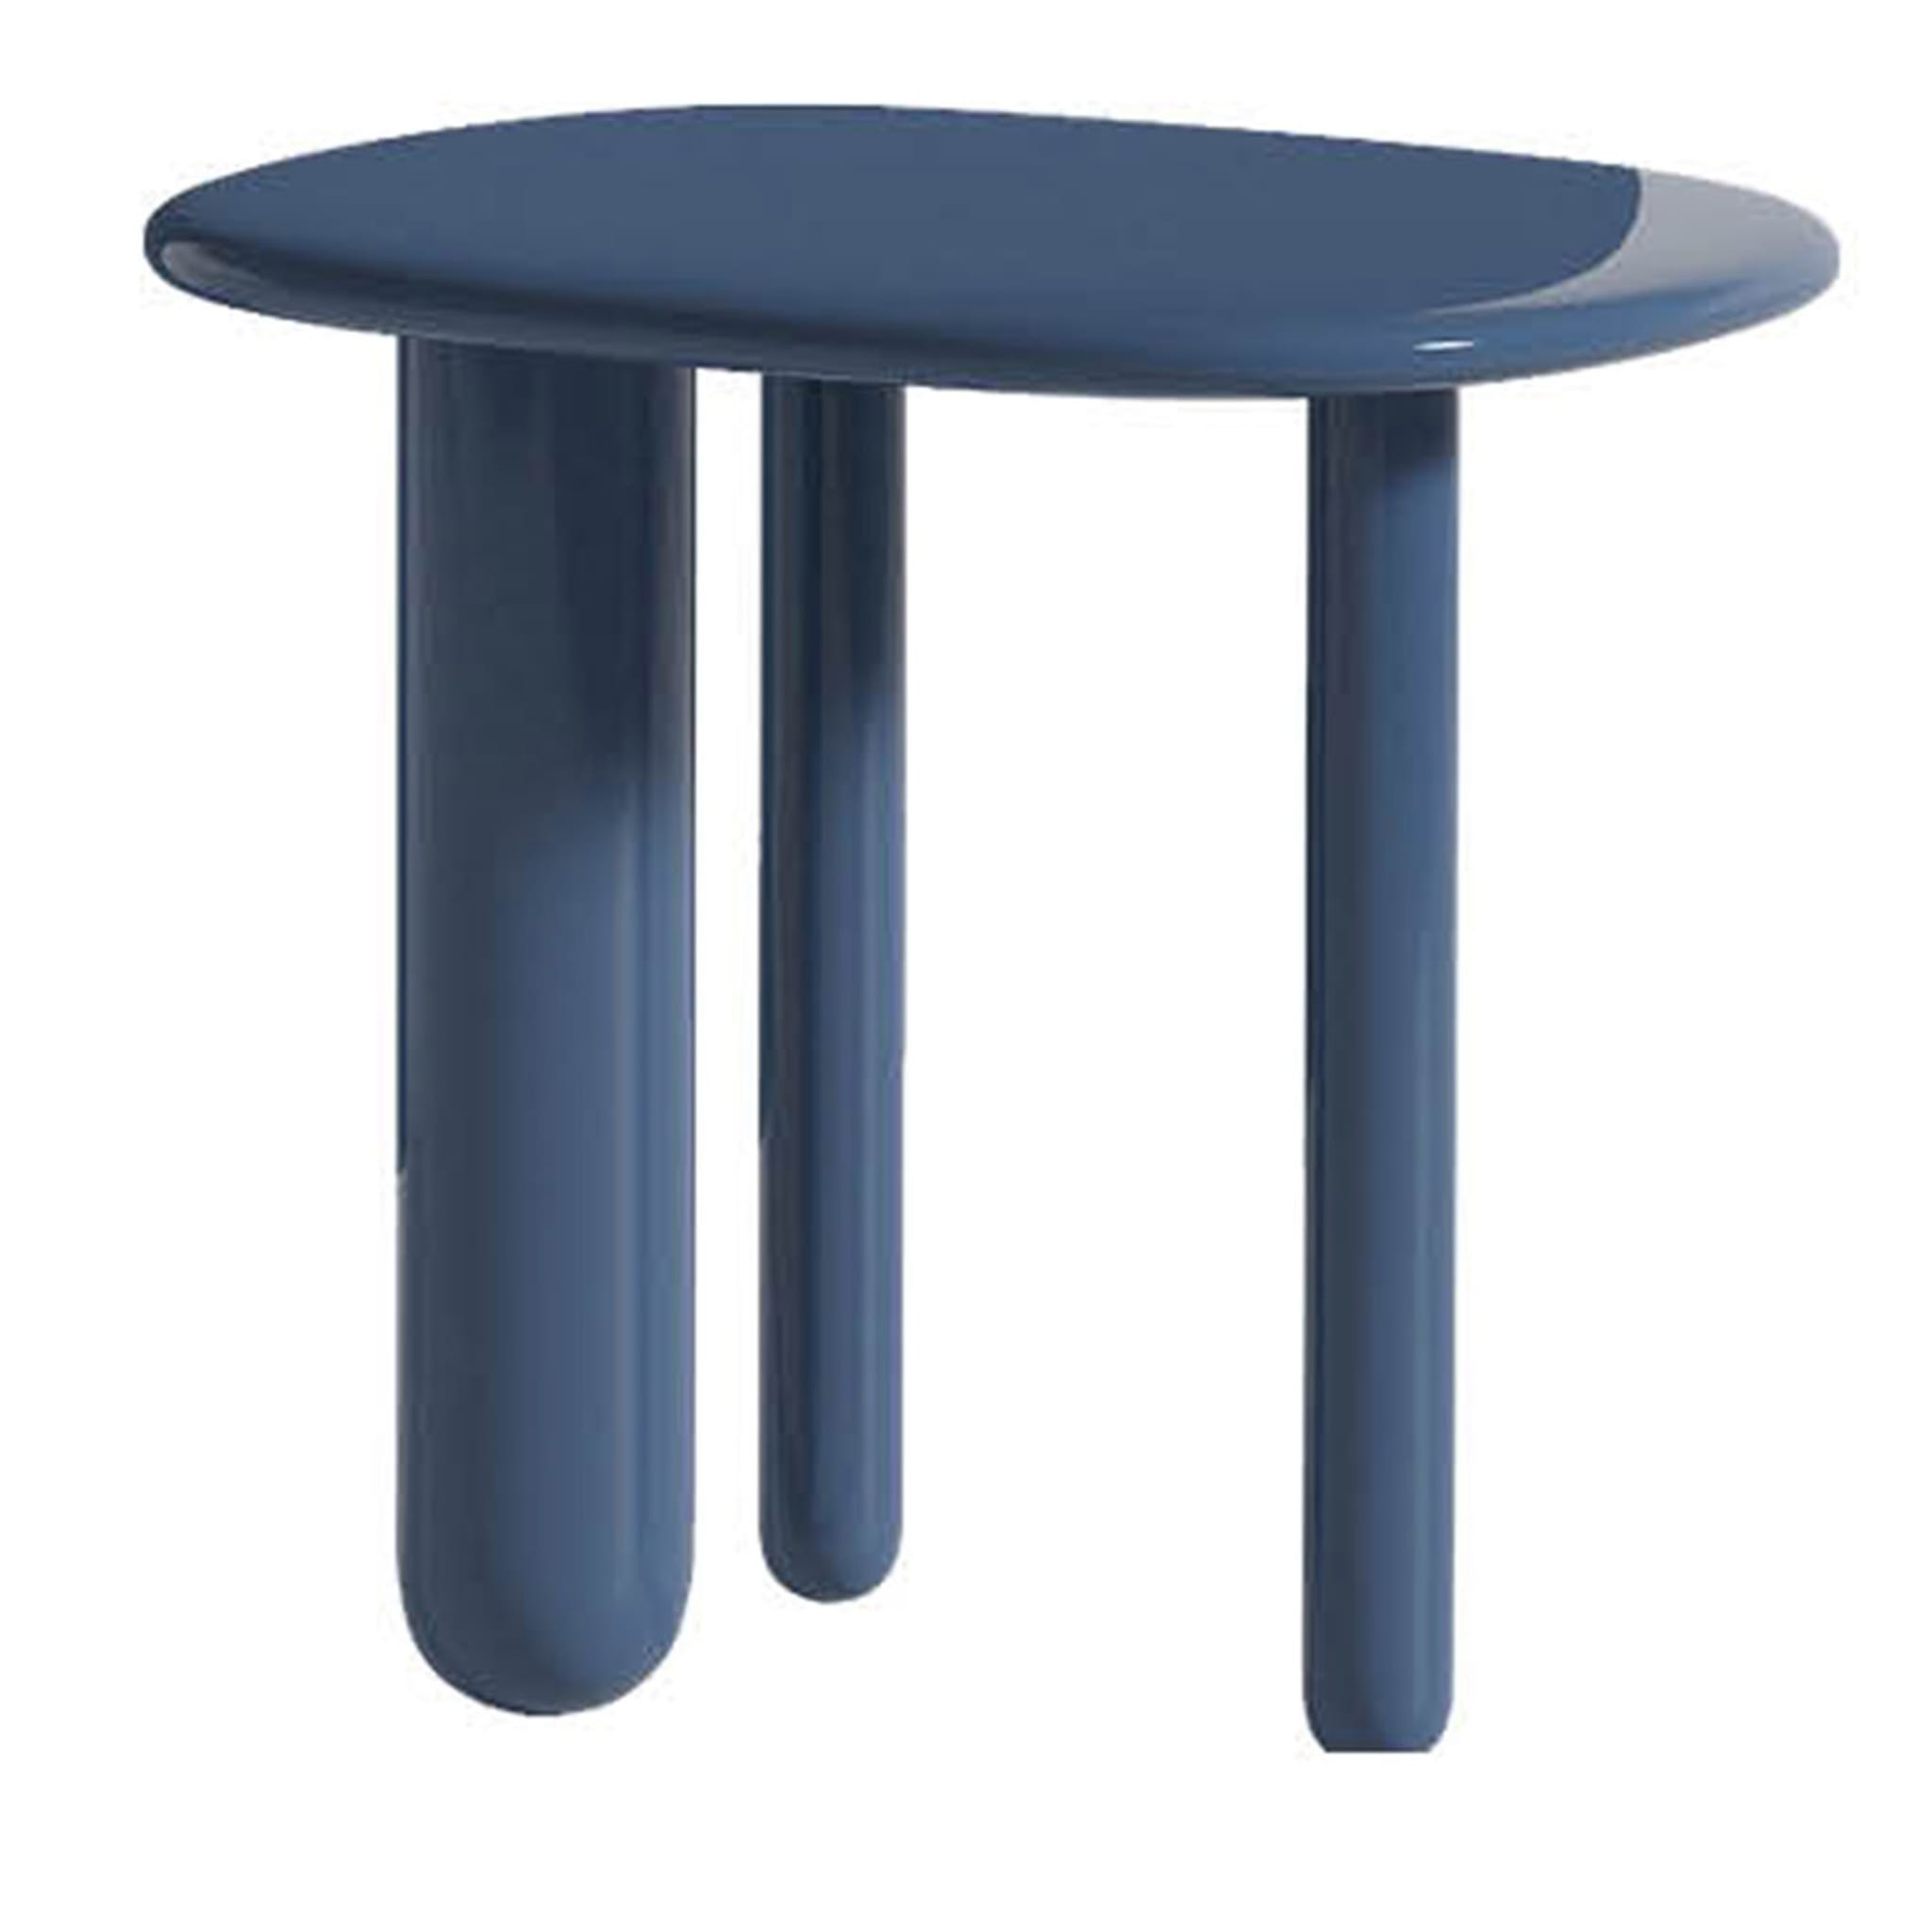 Tottori Blue Accent Table by Kateryna Sokolova - Main view